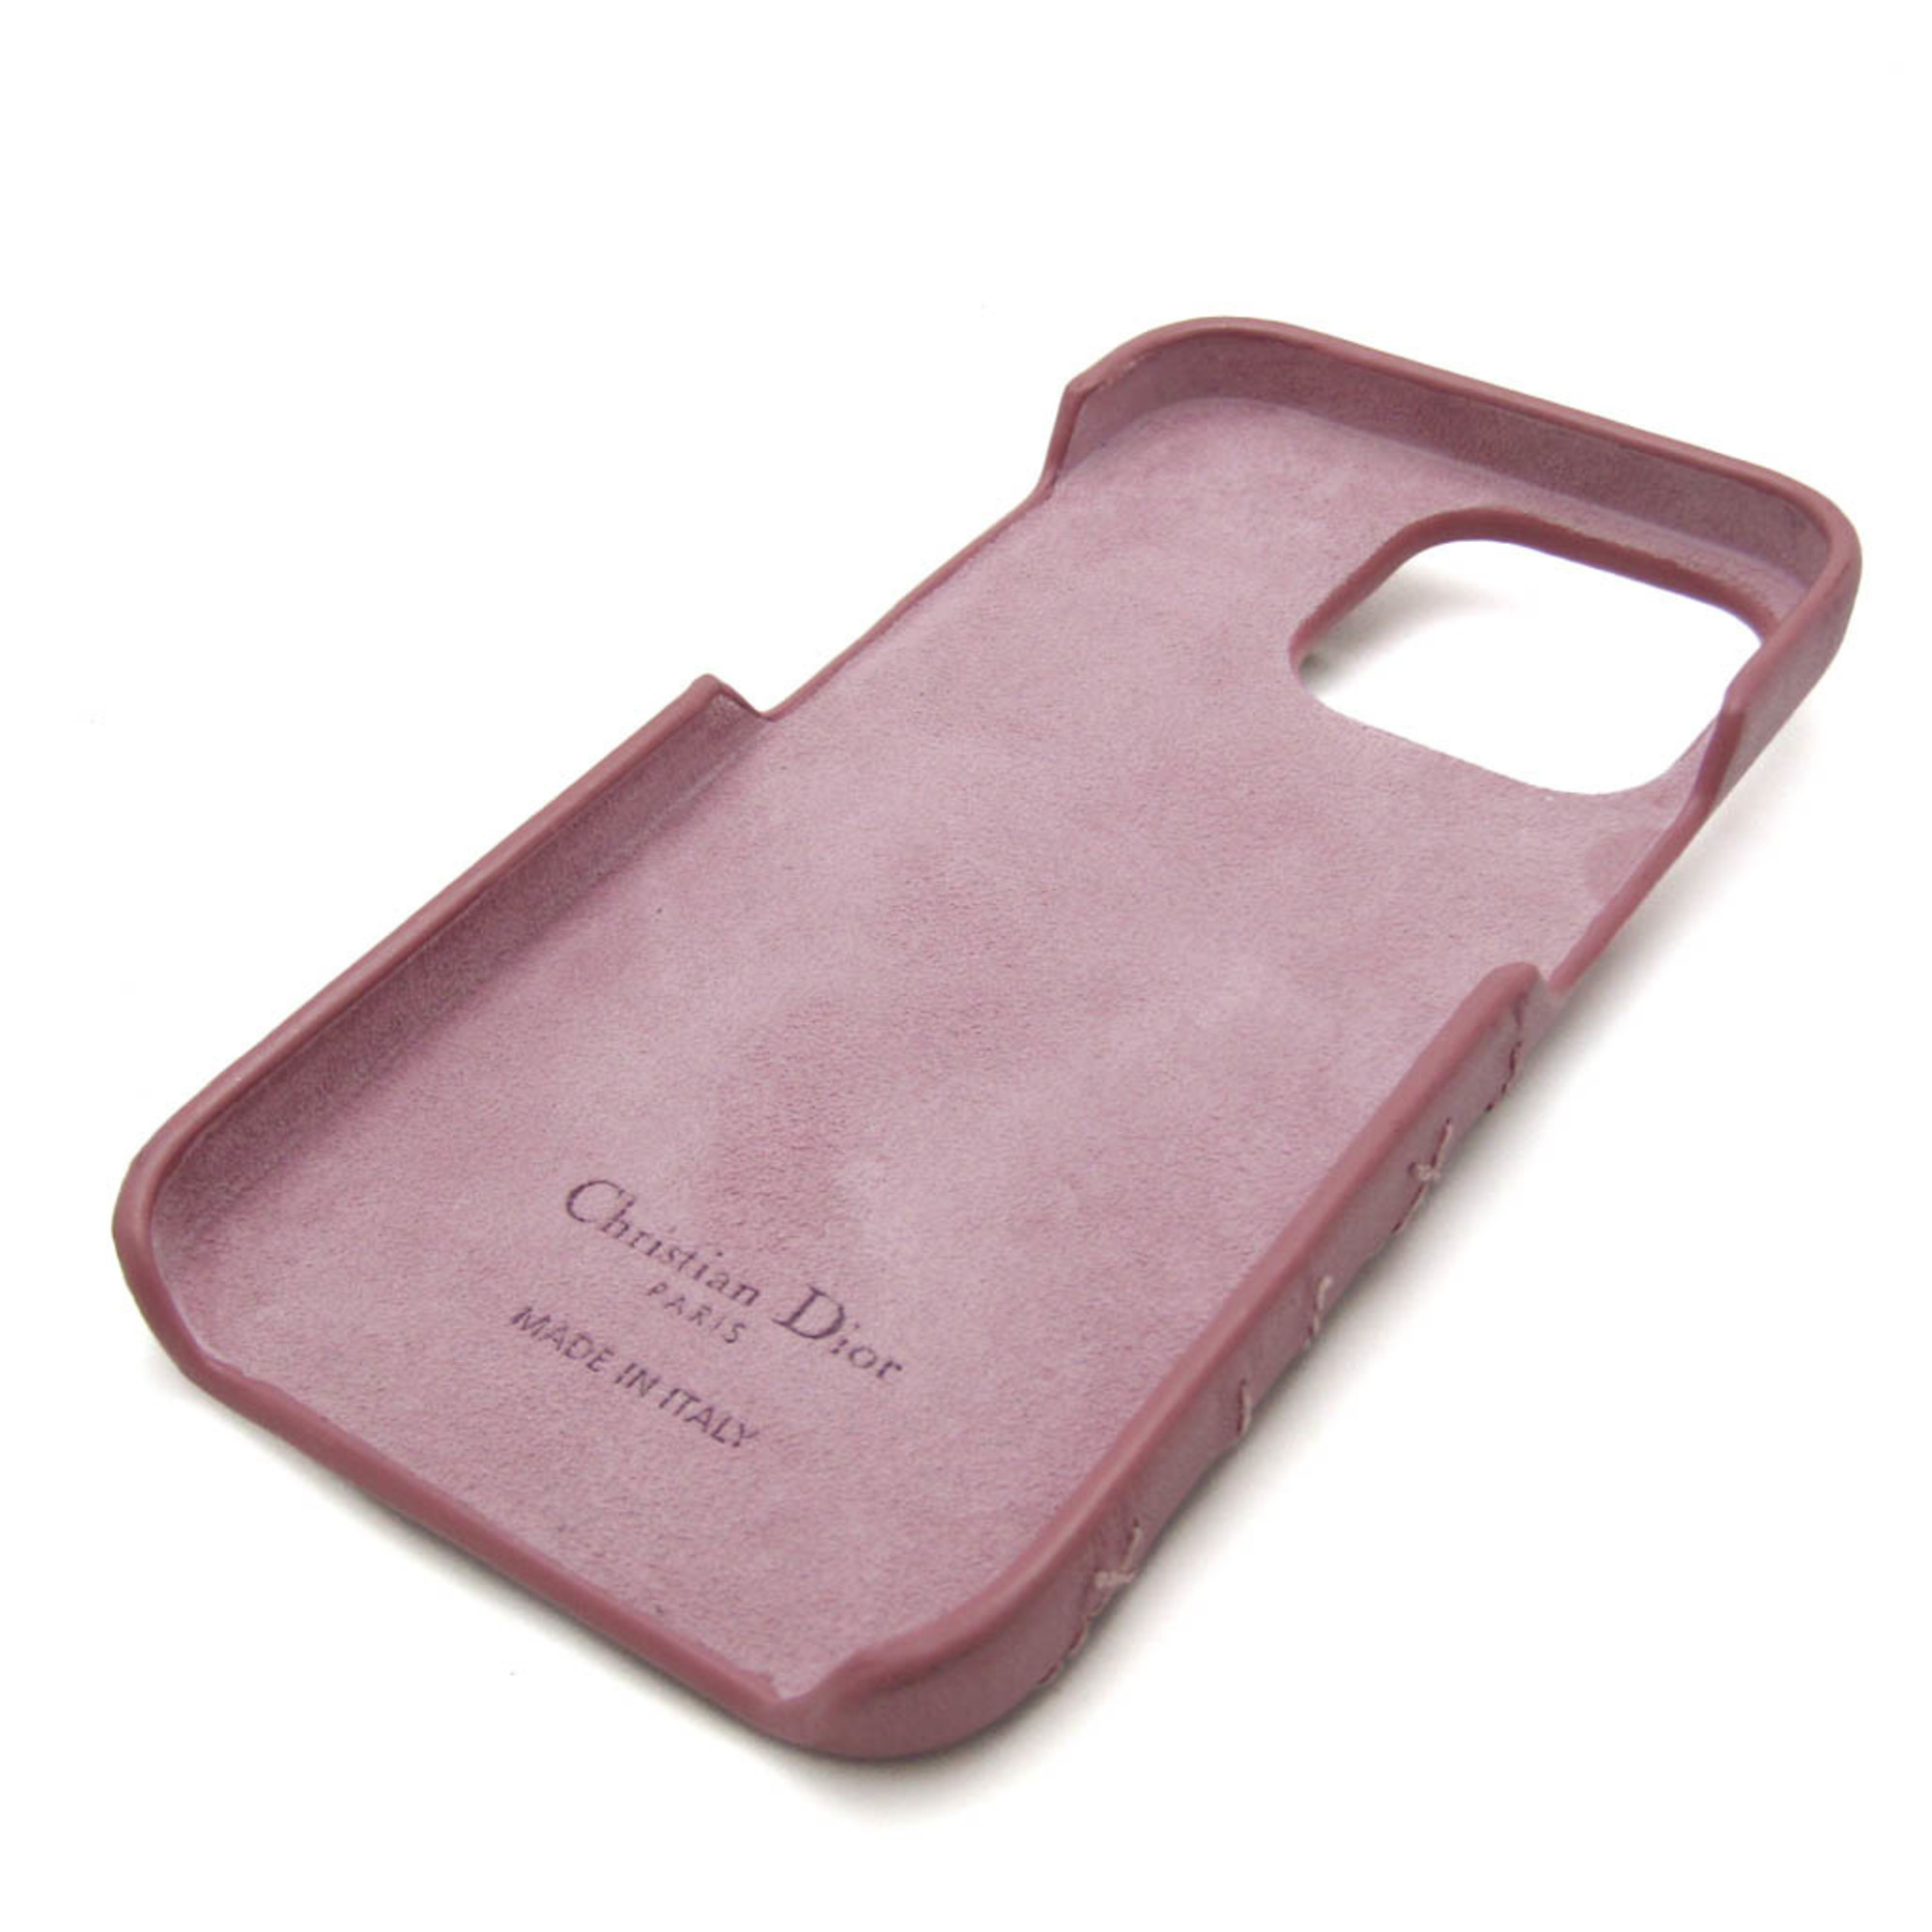 Christian Dior Leather Phone Bumper Dusty Pink LADY DIOR IPHONE12 IPHONE12PRO case